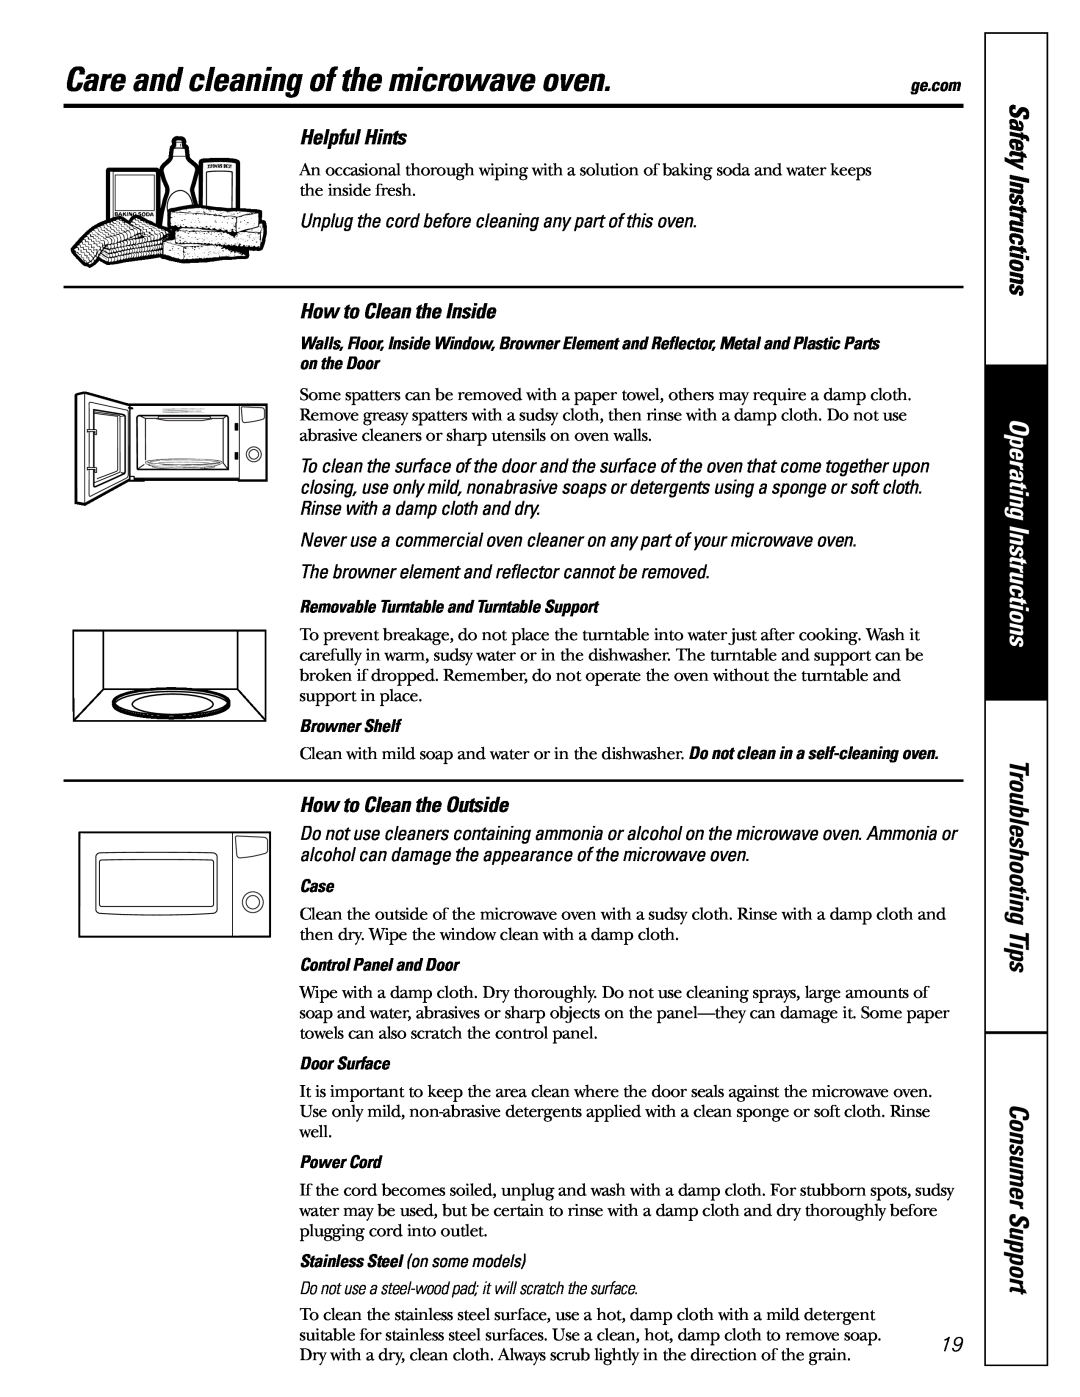 GE WES1384SMSS Care and cleaning of the microwave oven, Safety Instructions, Operating Instructions, Browner Shelf, Case 